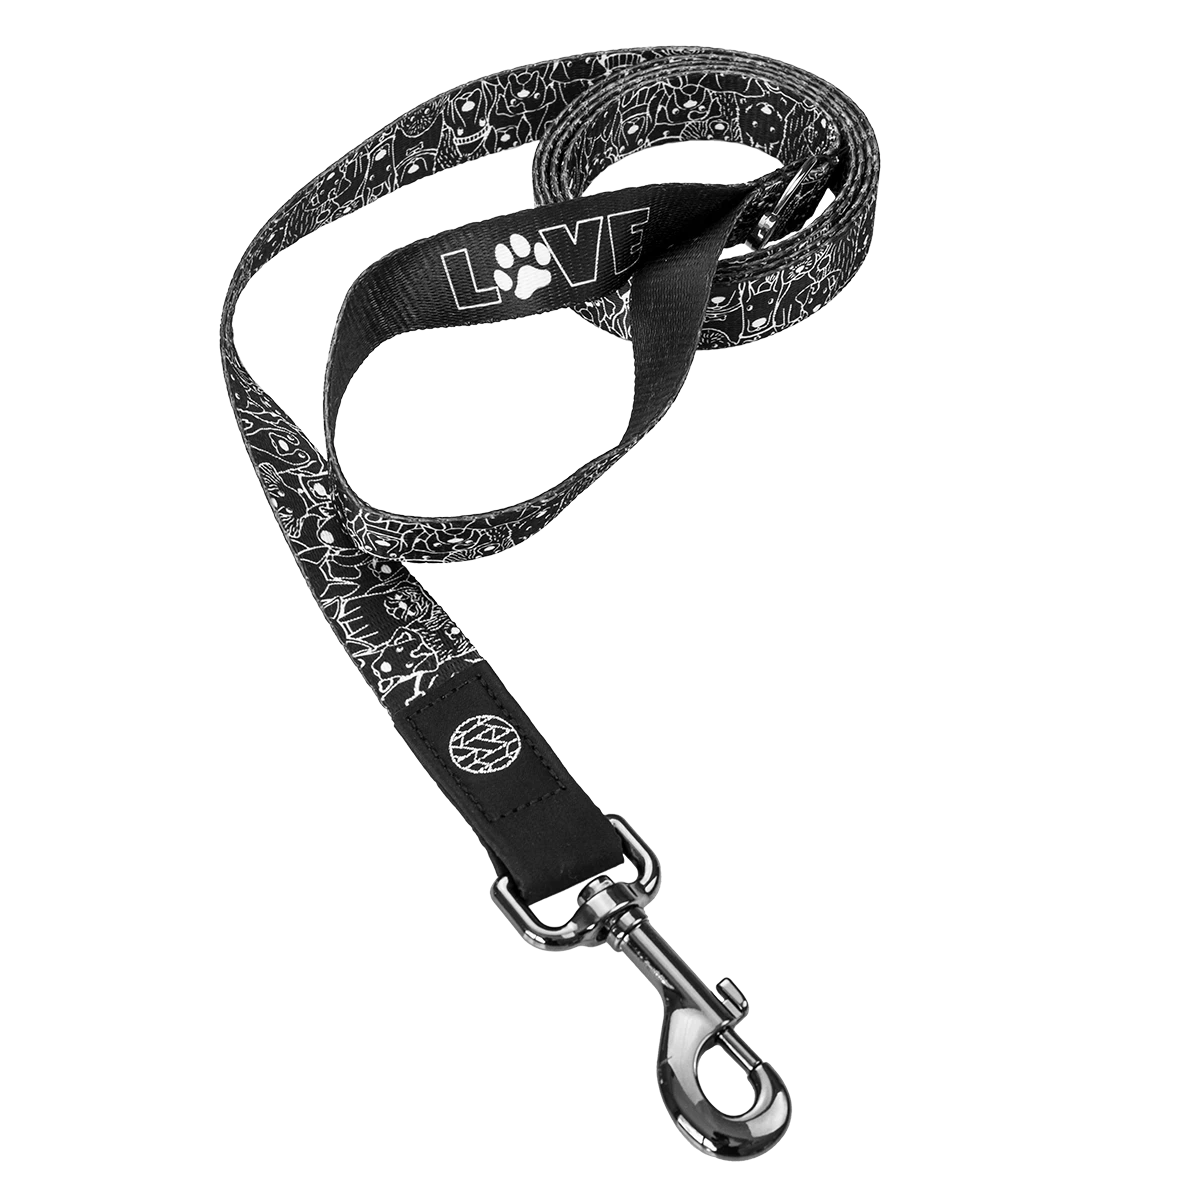 A dog leash with a metal pull-down attachment clip and a hook end for handler's hand. The design is black with all white outlines of differetn dogs. The inside of the hoop handle says LOVE with a dog print for the O. 